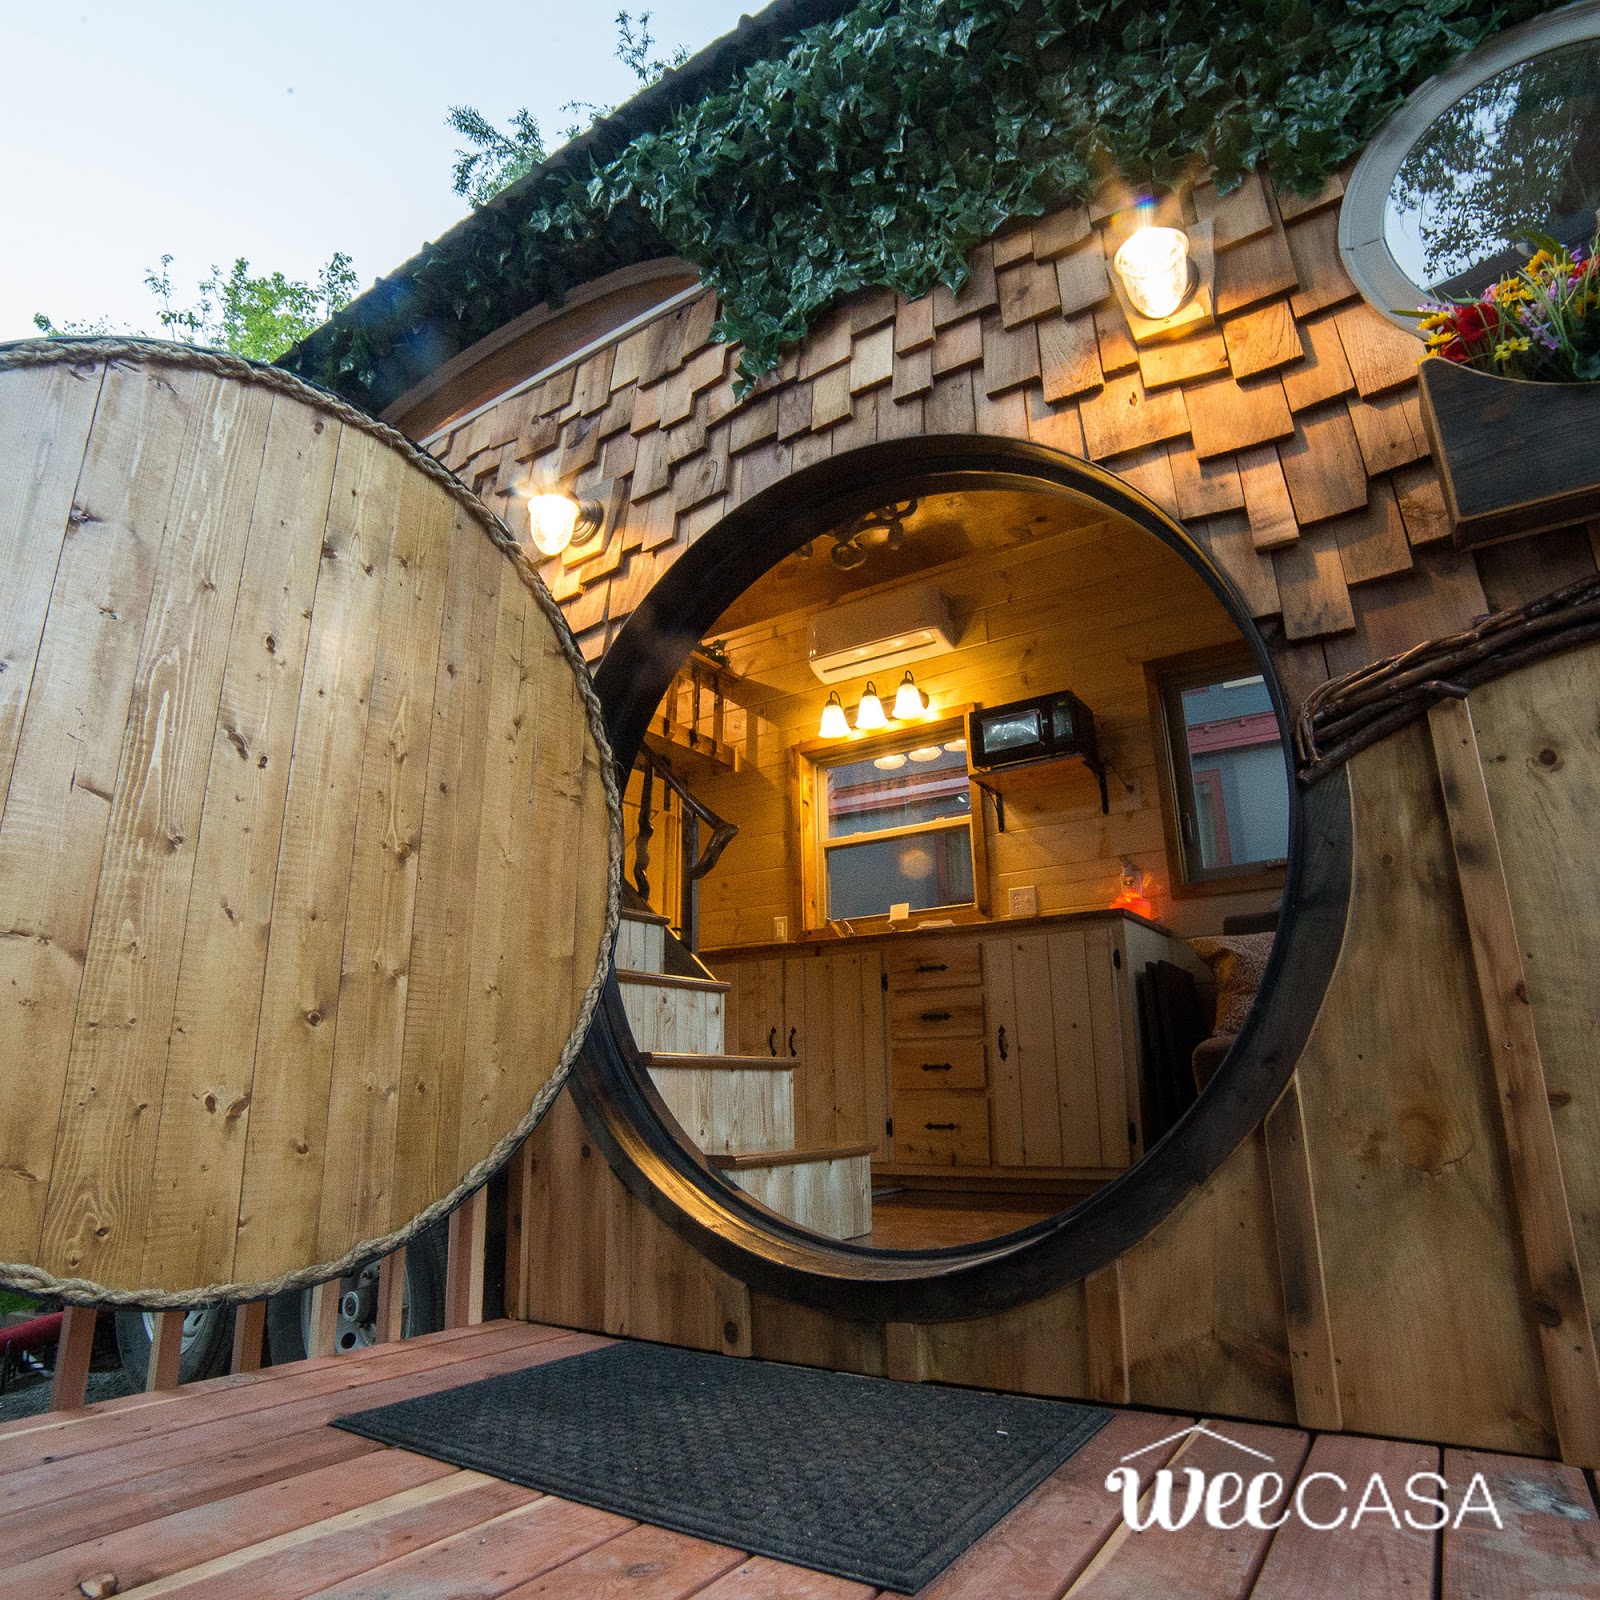 The Hobbit House 170 Sq Ft Tiny House Town